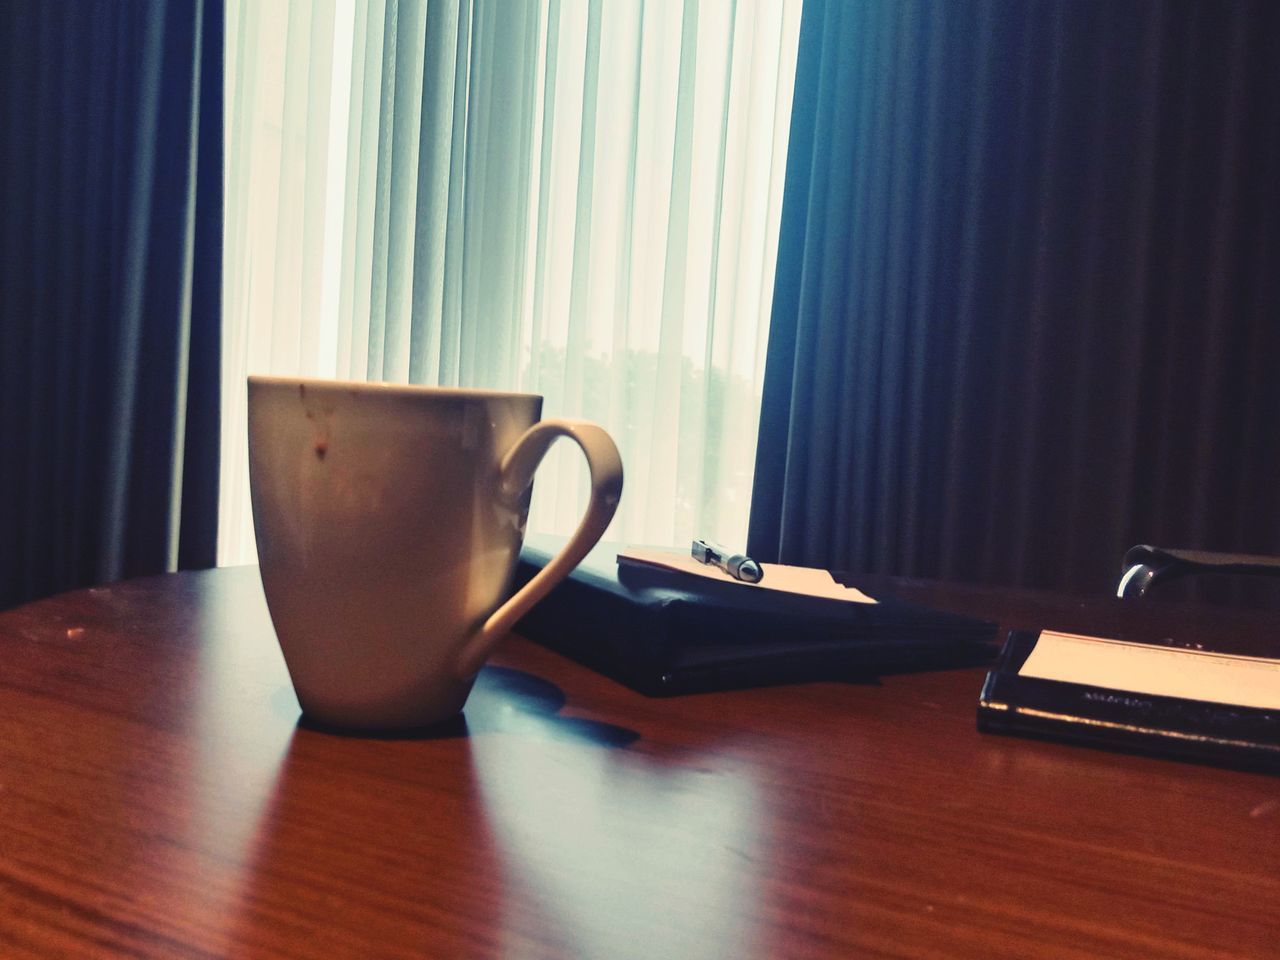 table, indoors, curtain, interior design, window covering, cup, no people, mug, tableware, wood, coffee cup, room, home interior, furniture, blue, window, desk, still life, business, office, technology, communication, laptop, window treatment, drink